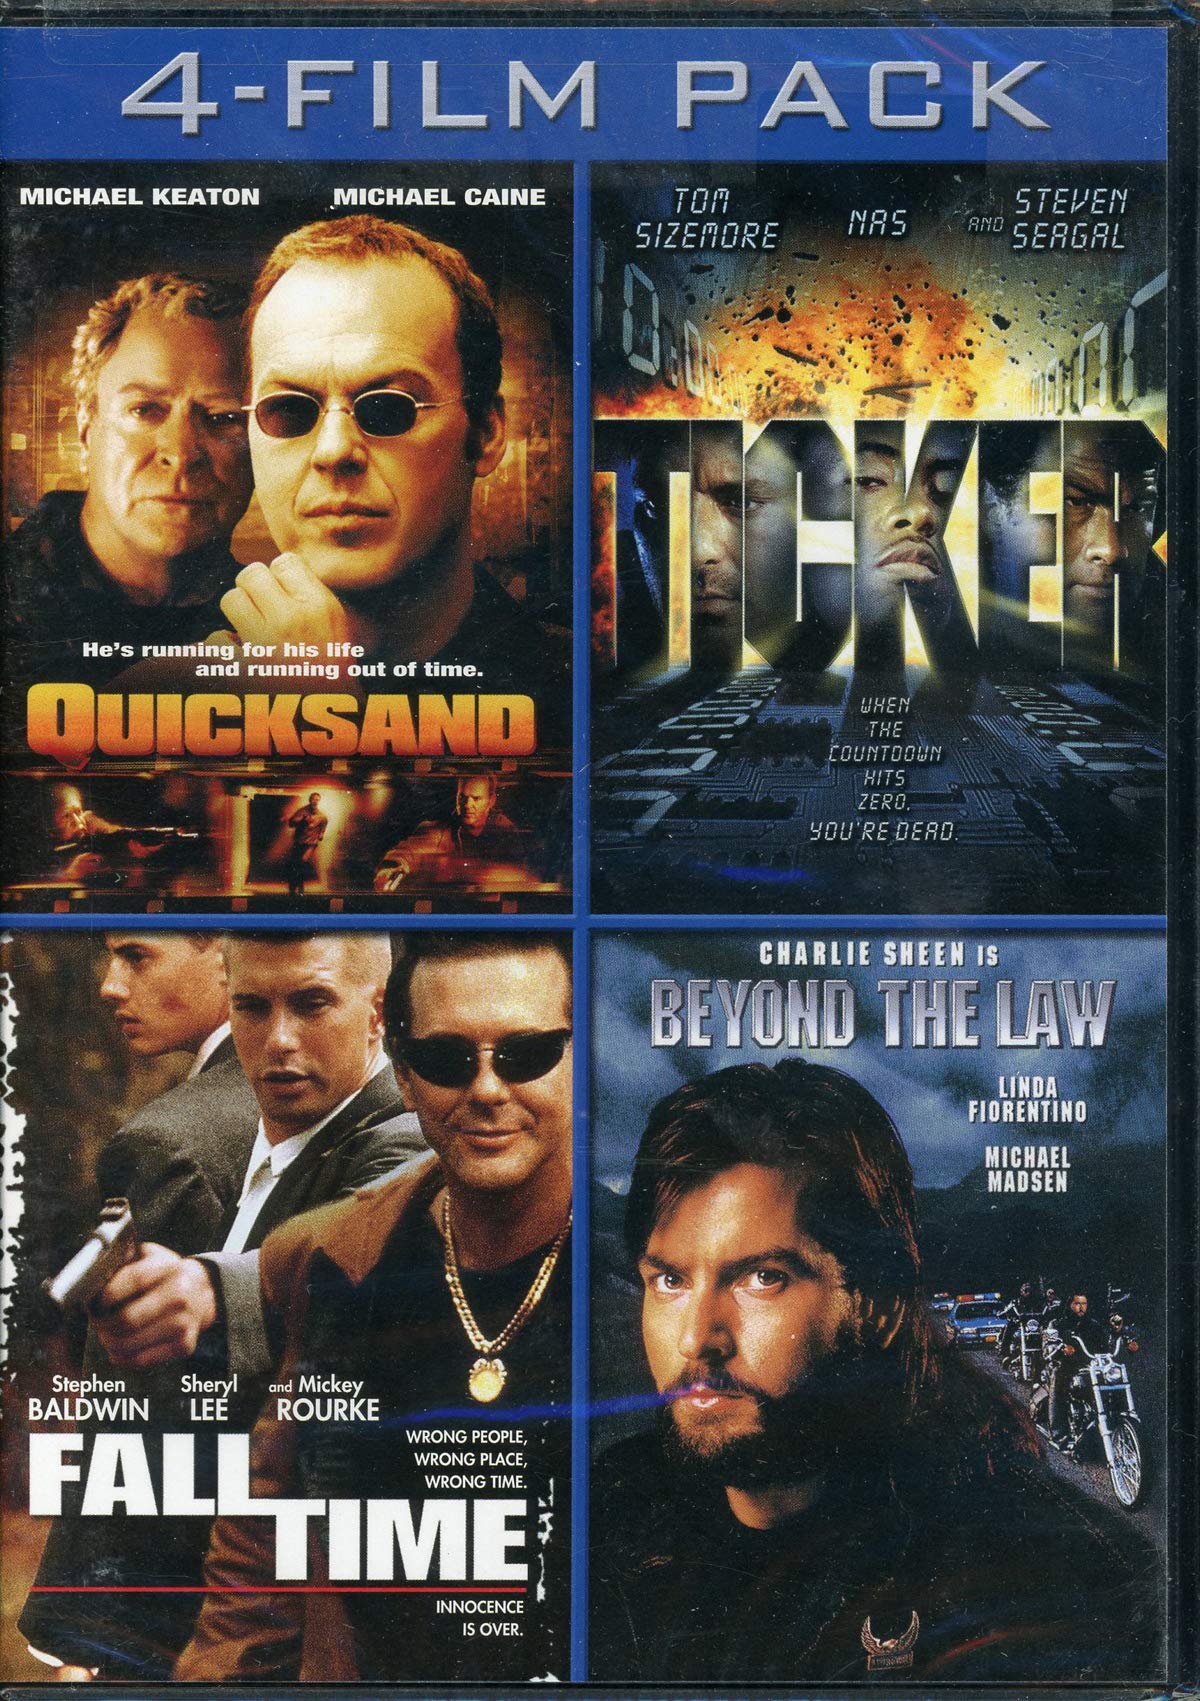 4 Film Pack: Quicksand, Ticker, Fall Time, & Beyond The Law